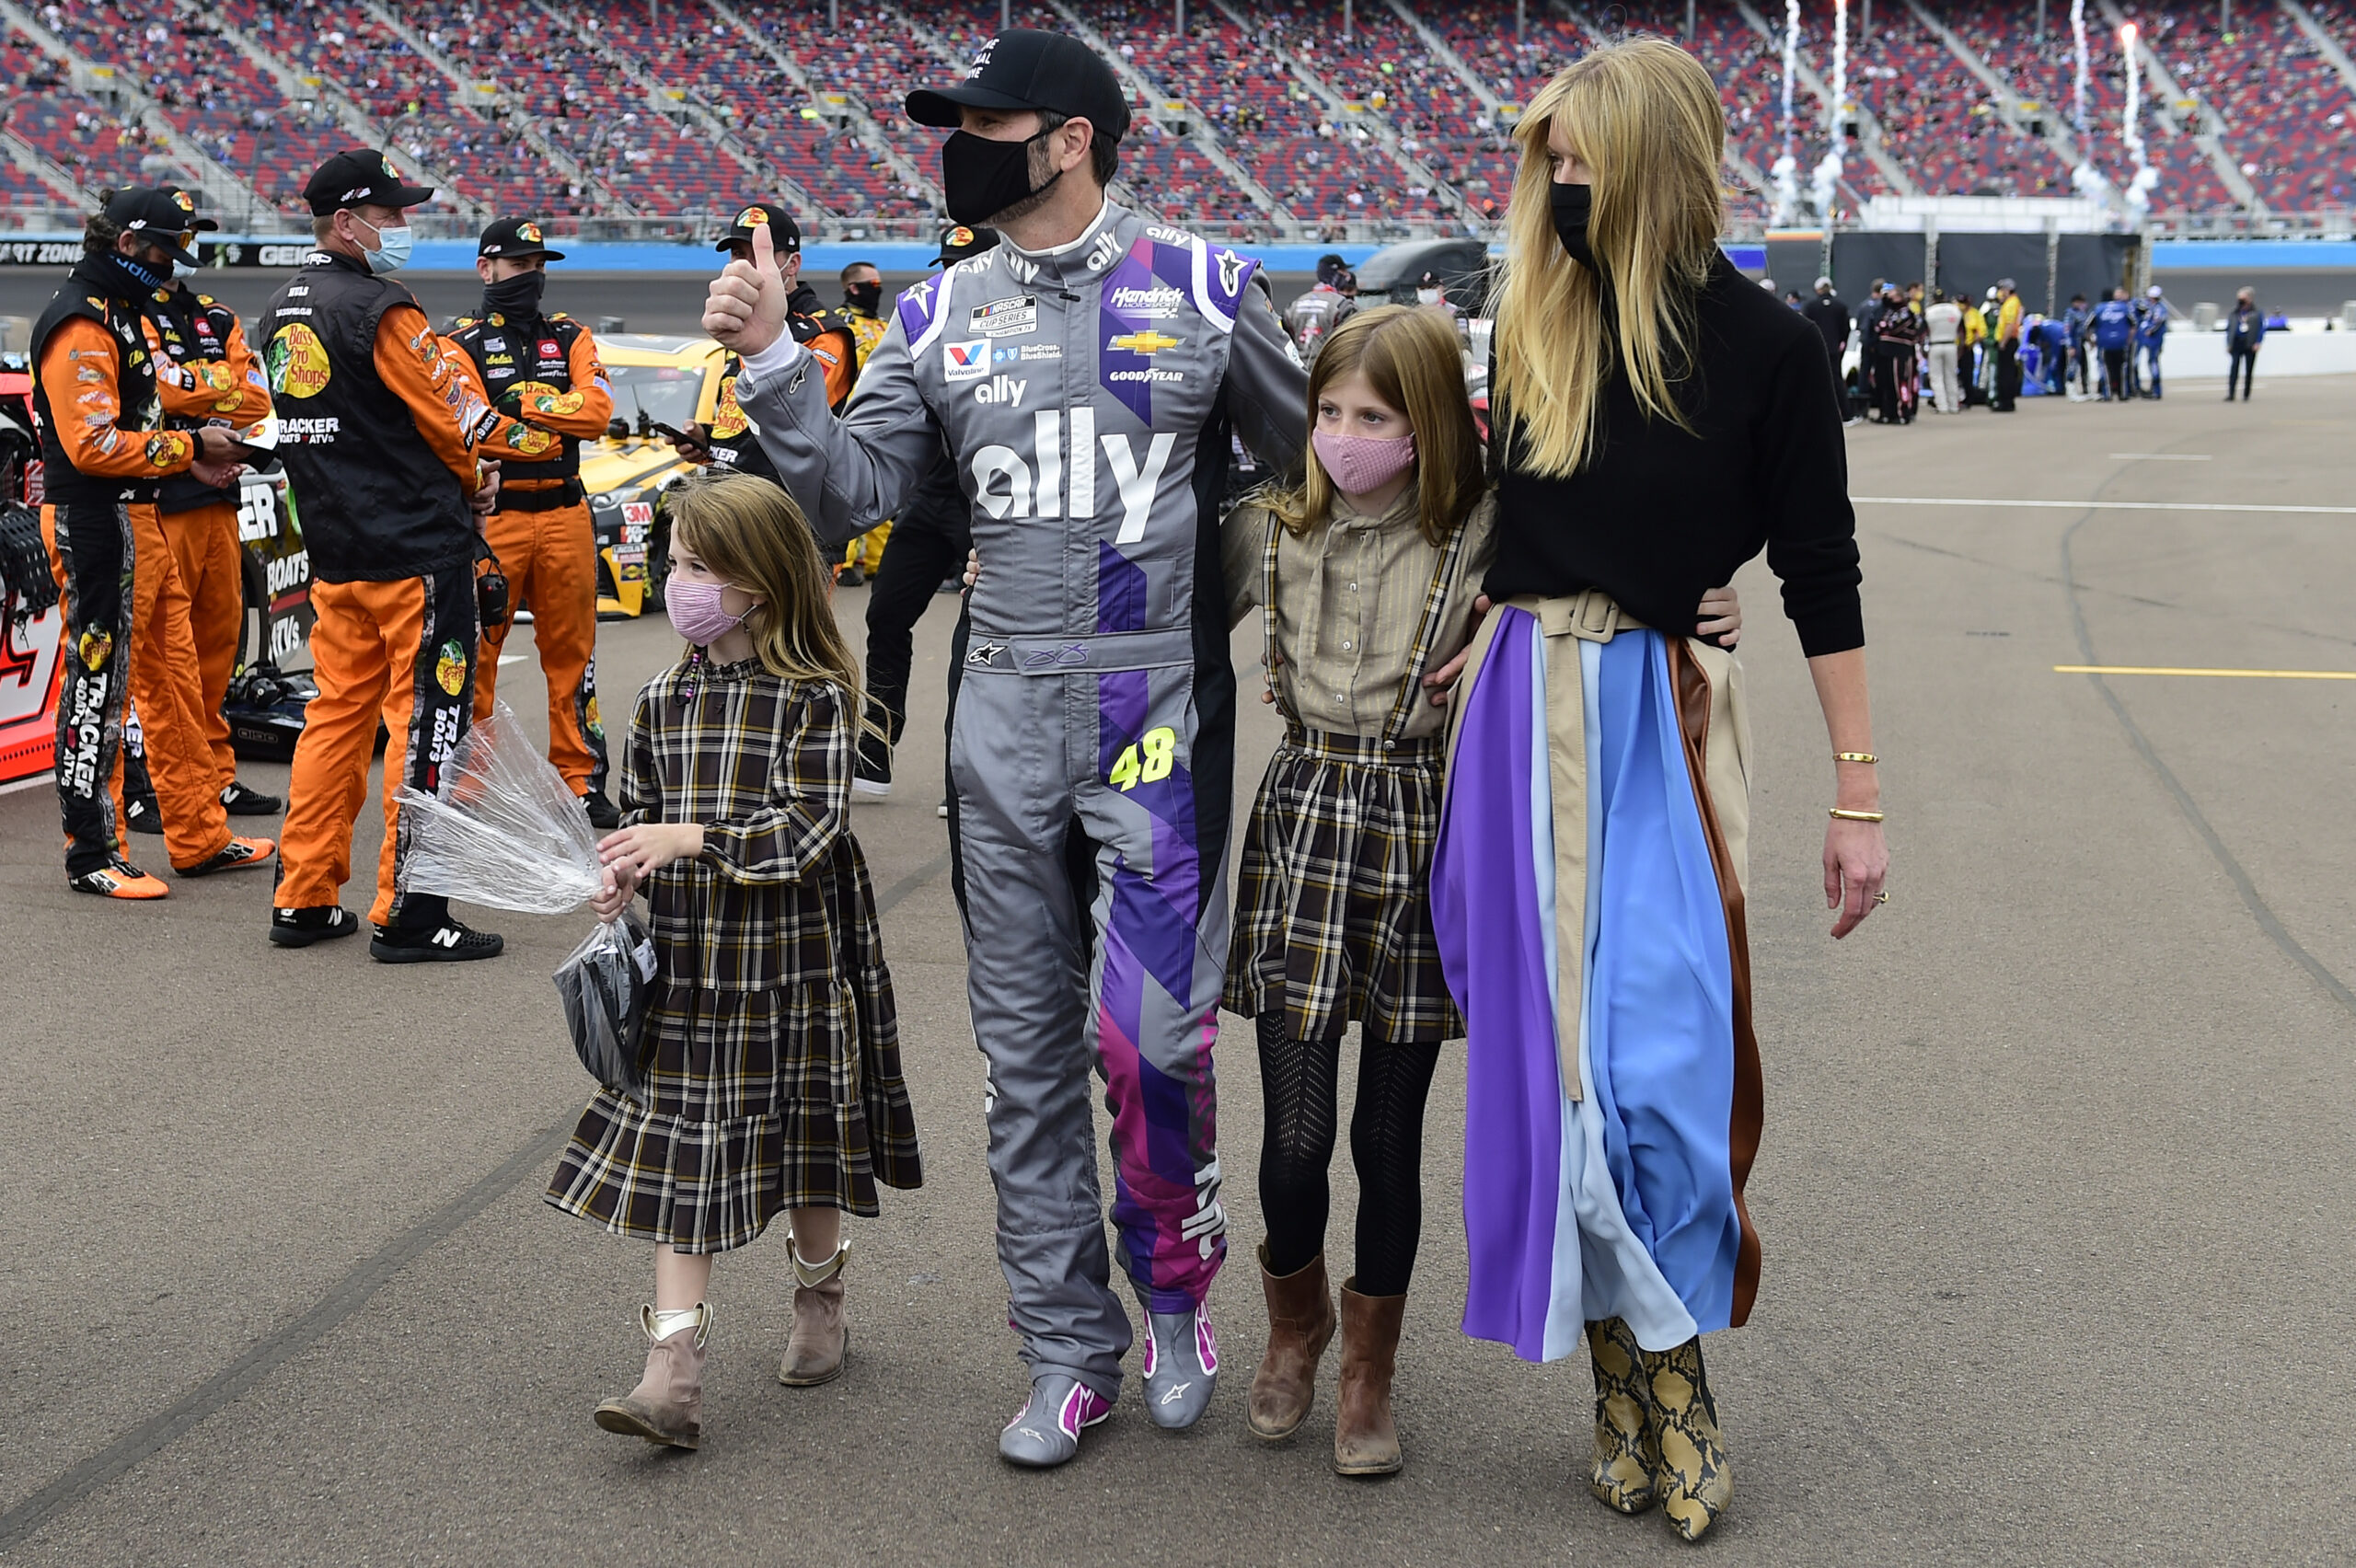 Suffice to say, Jimmie Johnson and his wife Chani look forward to more time with daughters Lydia and Genevieve. (Photo Credit: Jared C. Tilton/Getty Images)